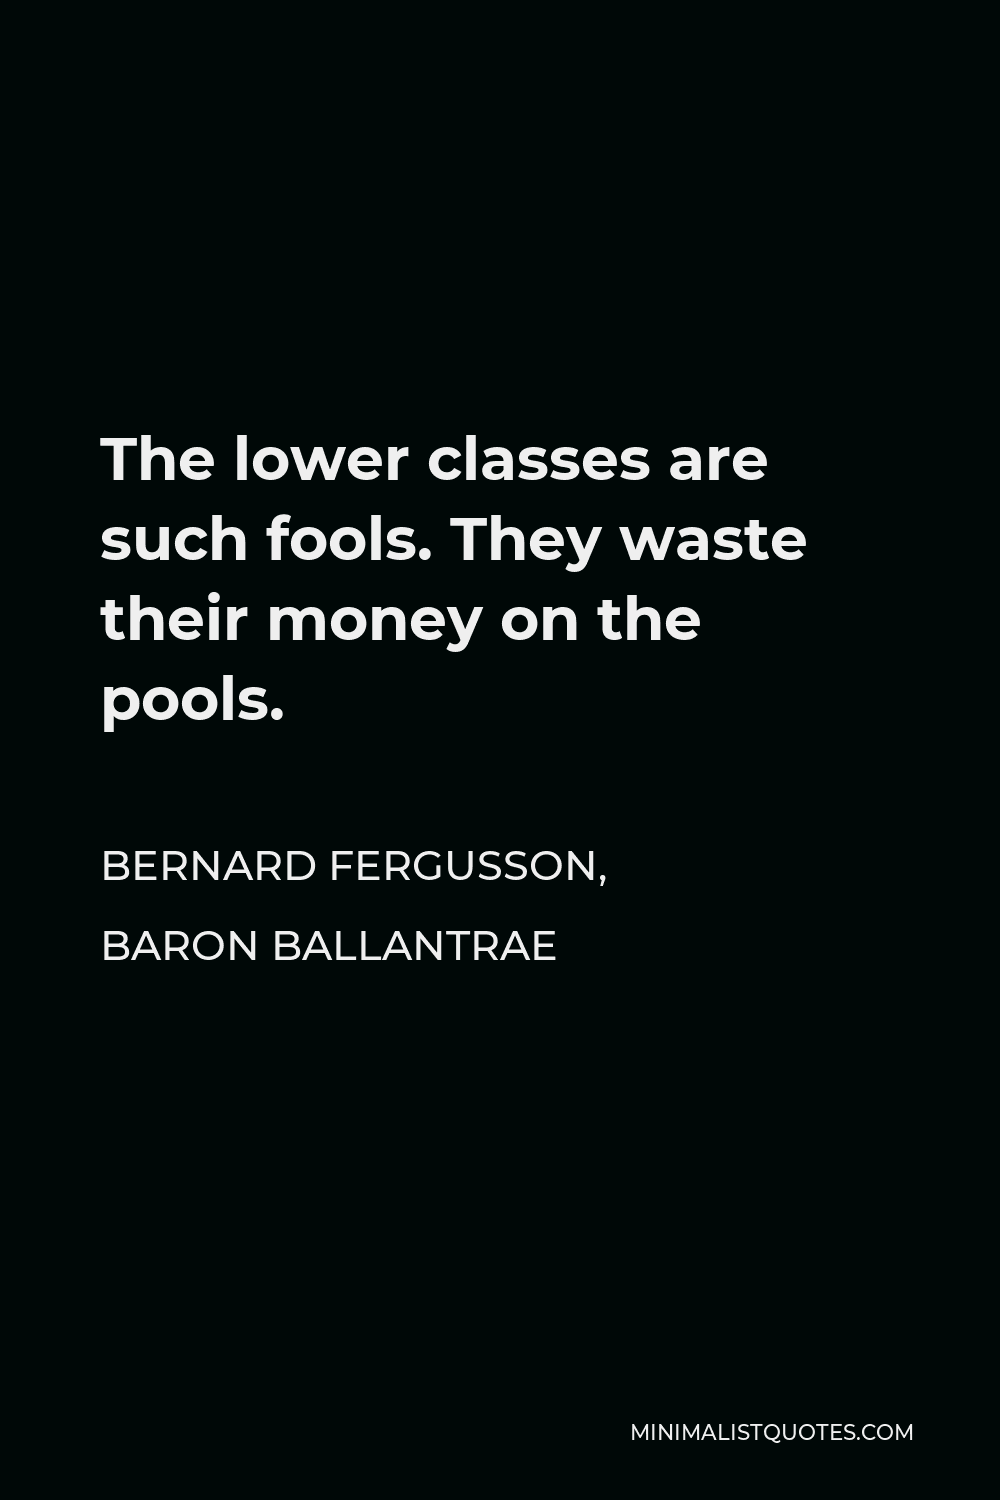 Bernard Fergusson, Baron Ballantrae Quote - The lower classes are such fools. They waste their money on the pools.